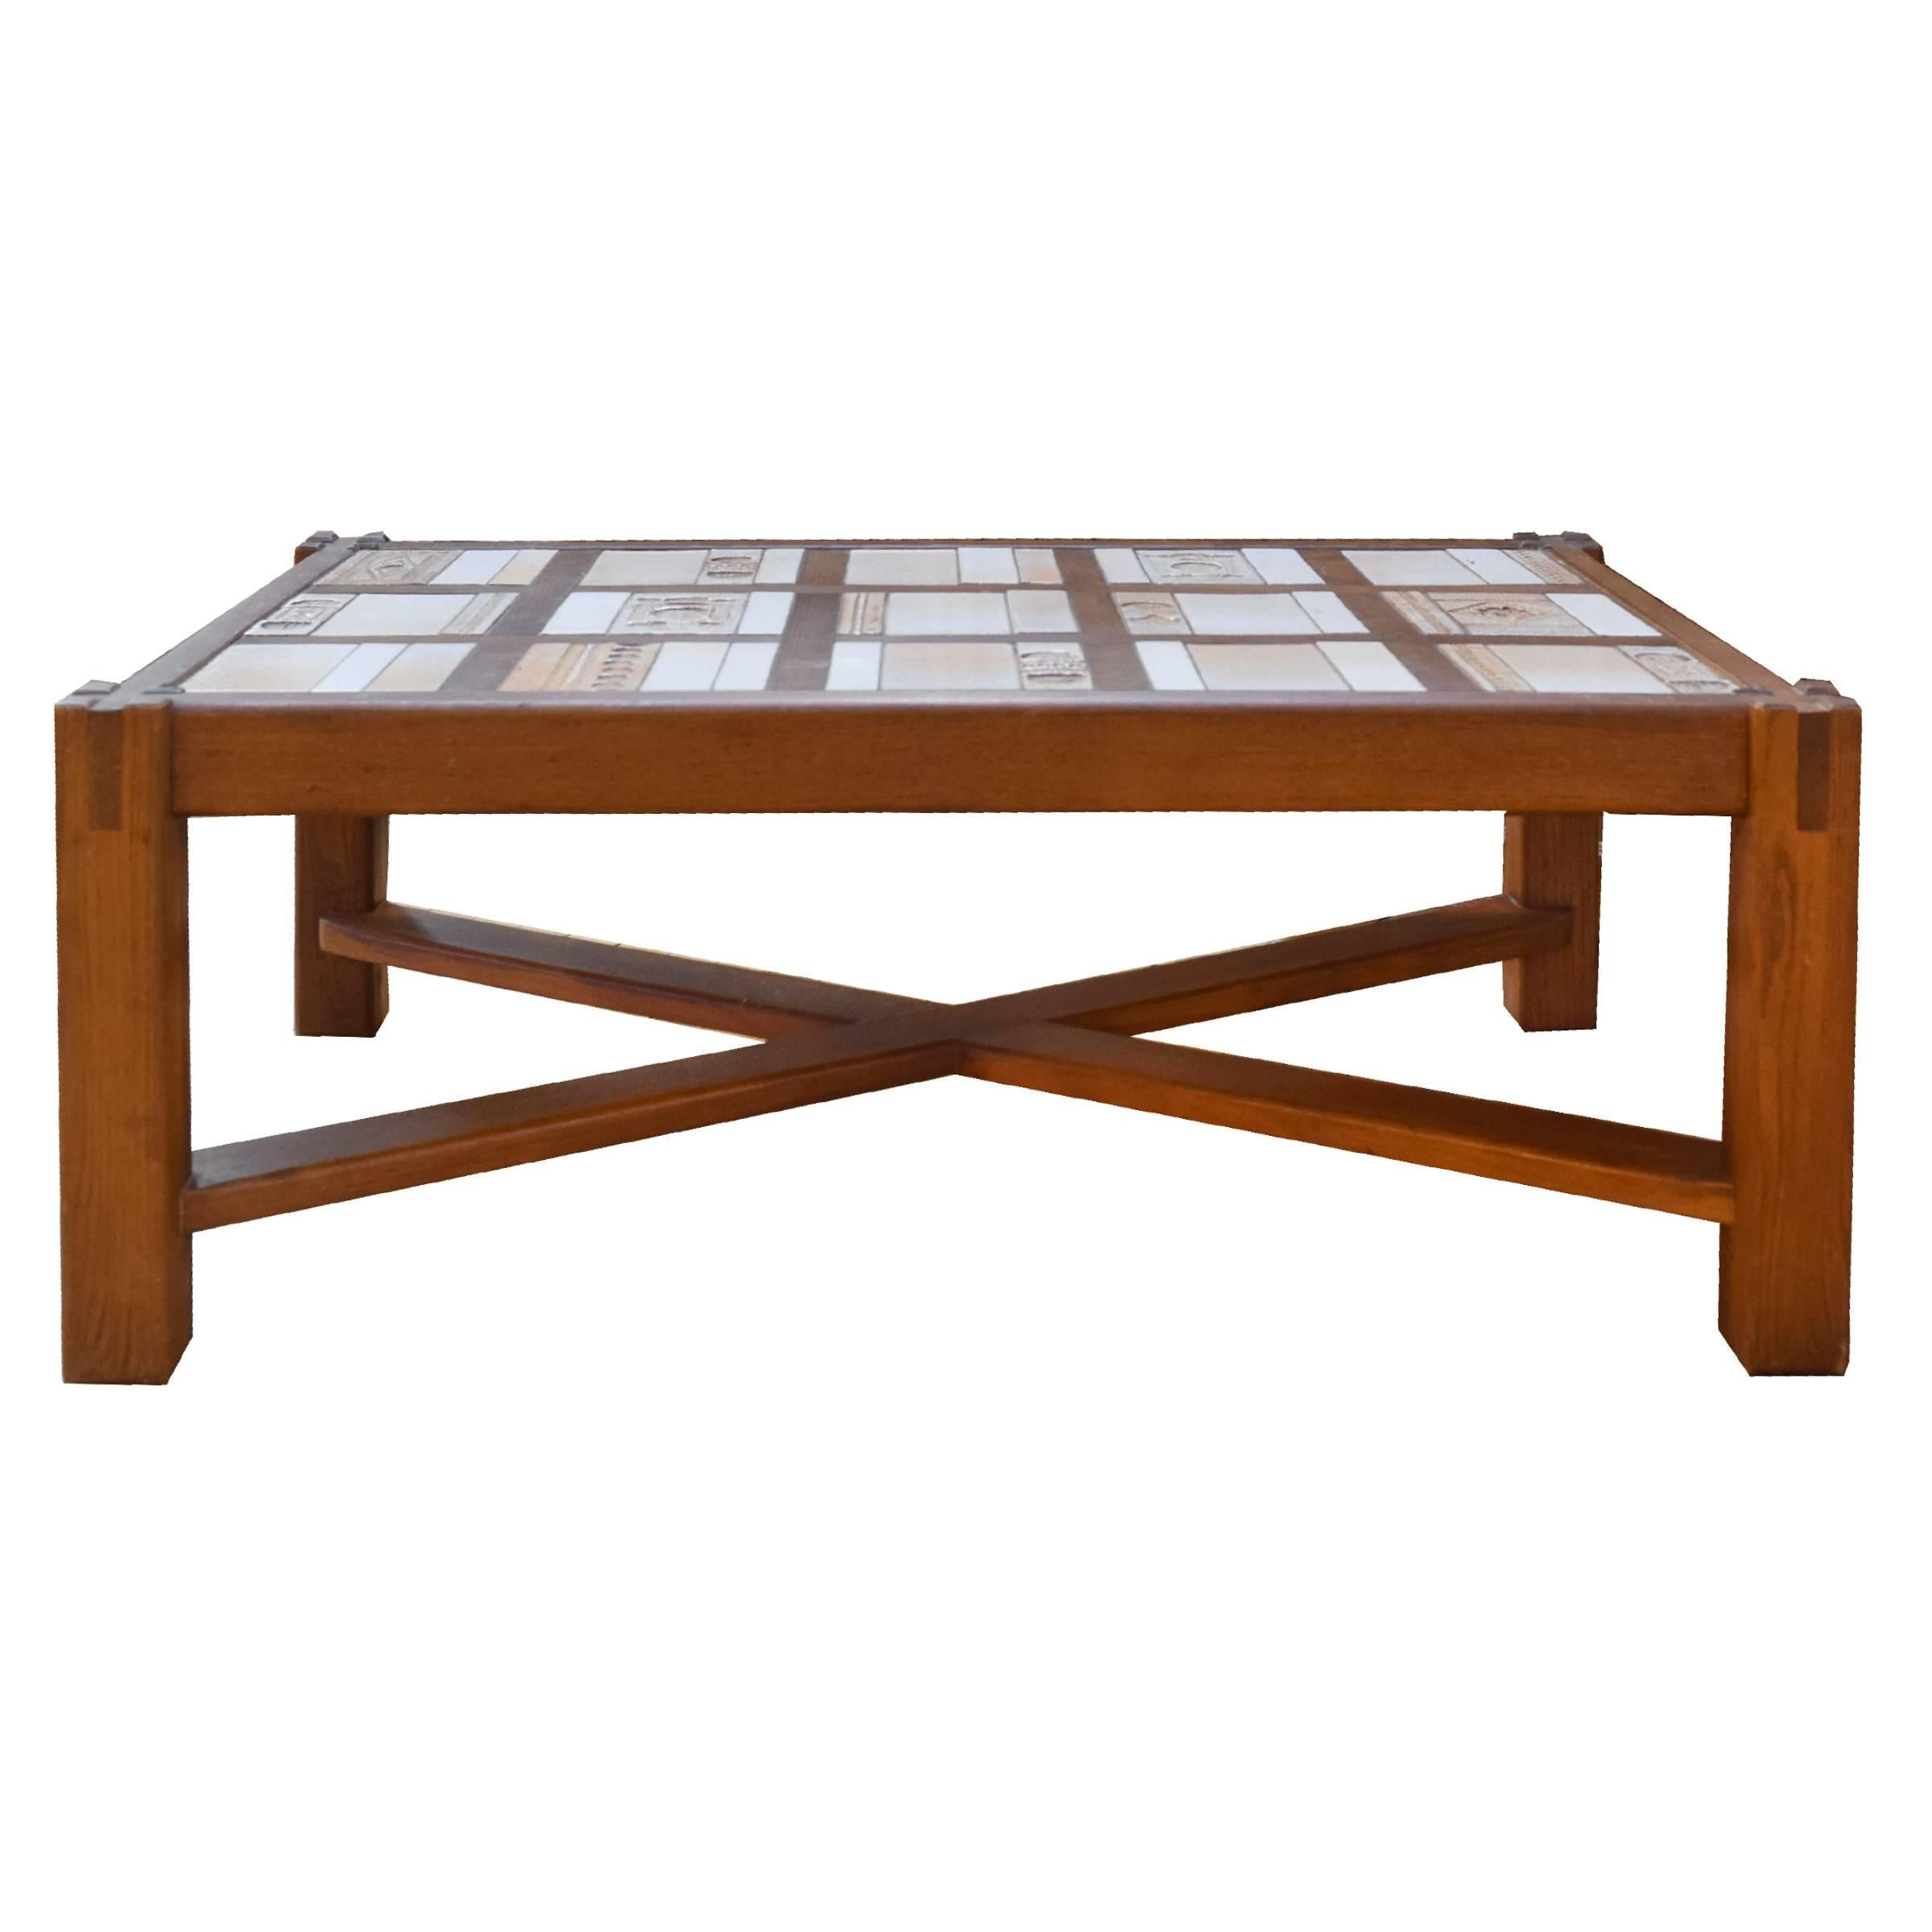 French Tile and Wood Coffee Table